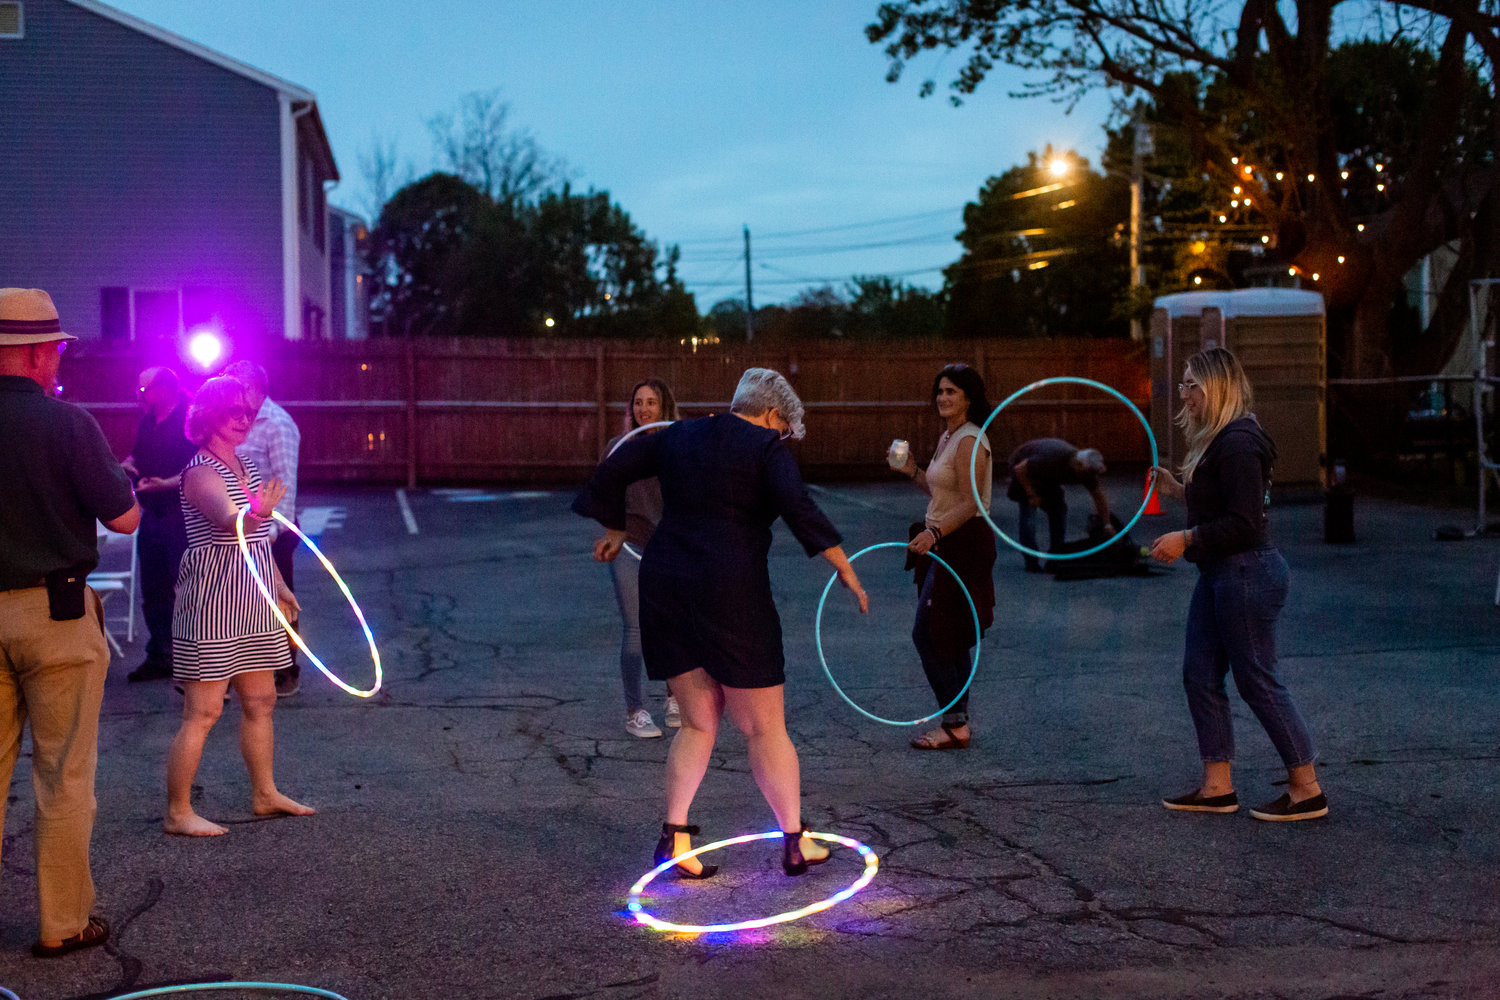 Joe Wagenback, Erin Read, Sarah Barboza, Melissa Goldstein, and Kristen Read take a spin with glow-in-the-dark hula hoops.